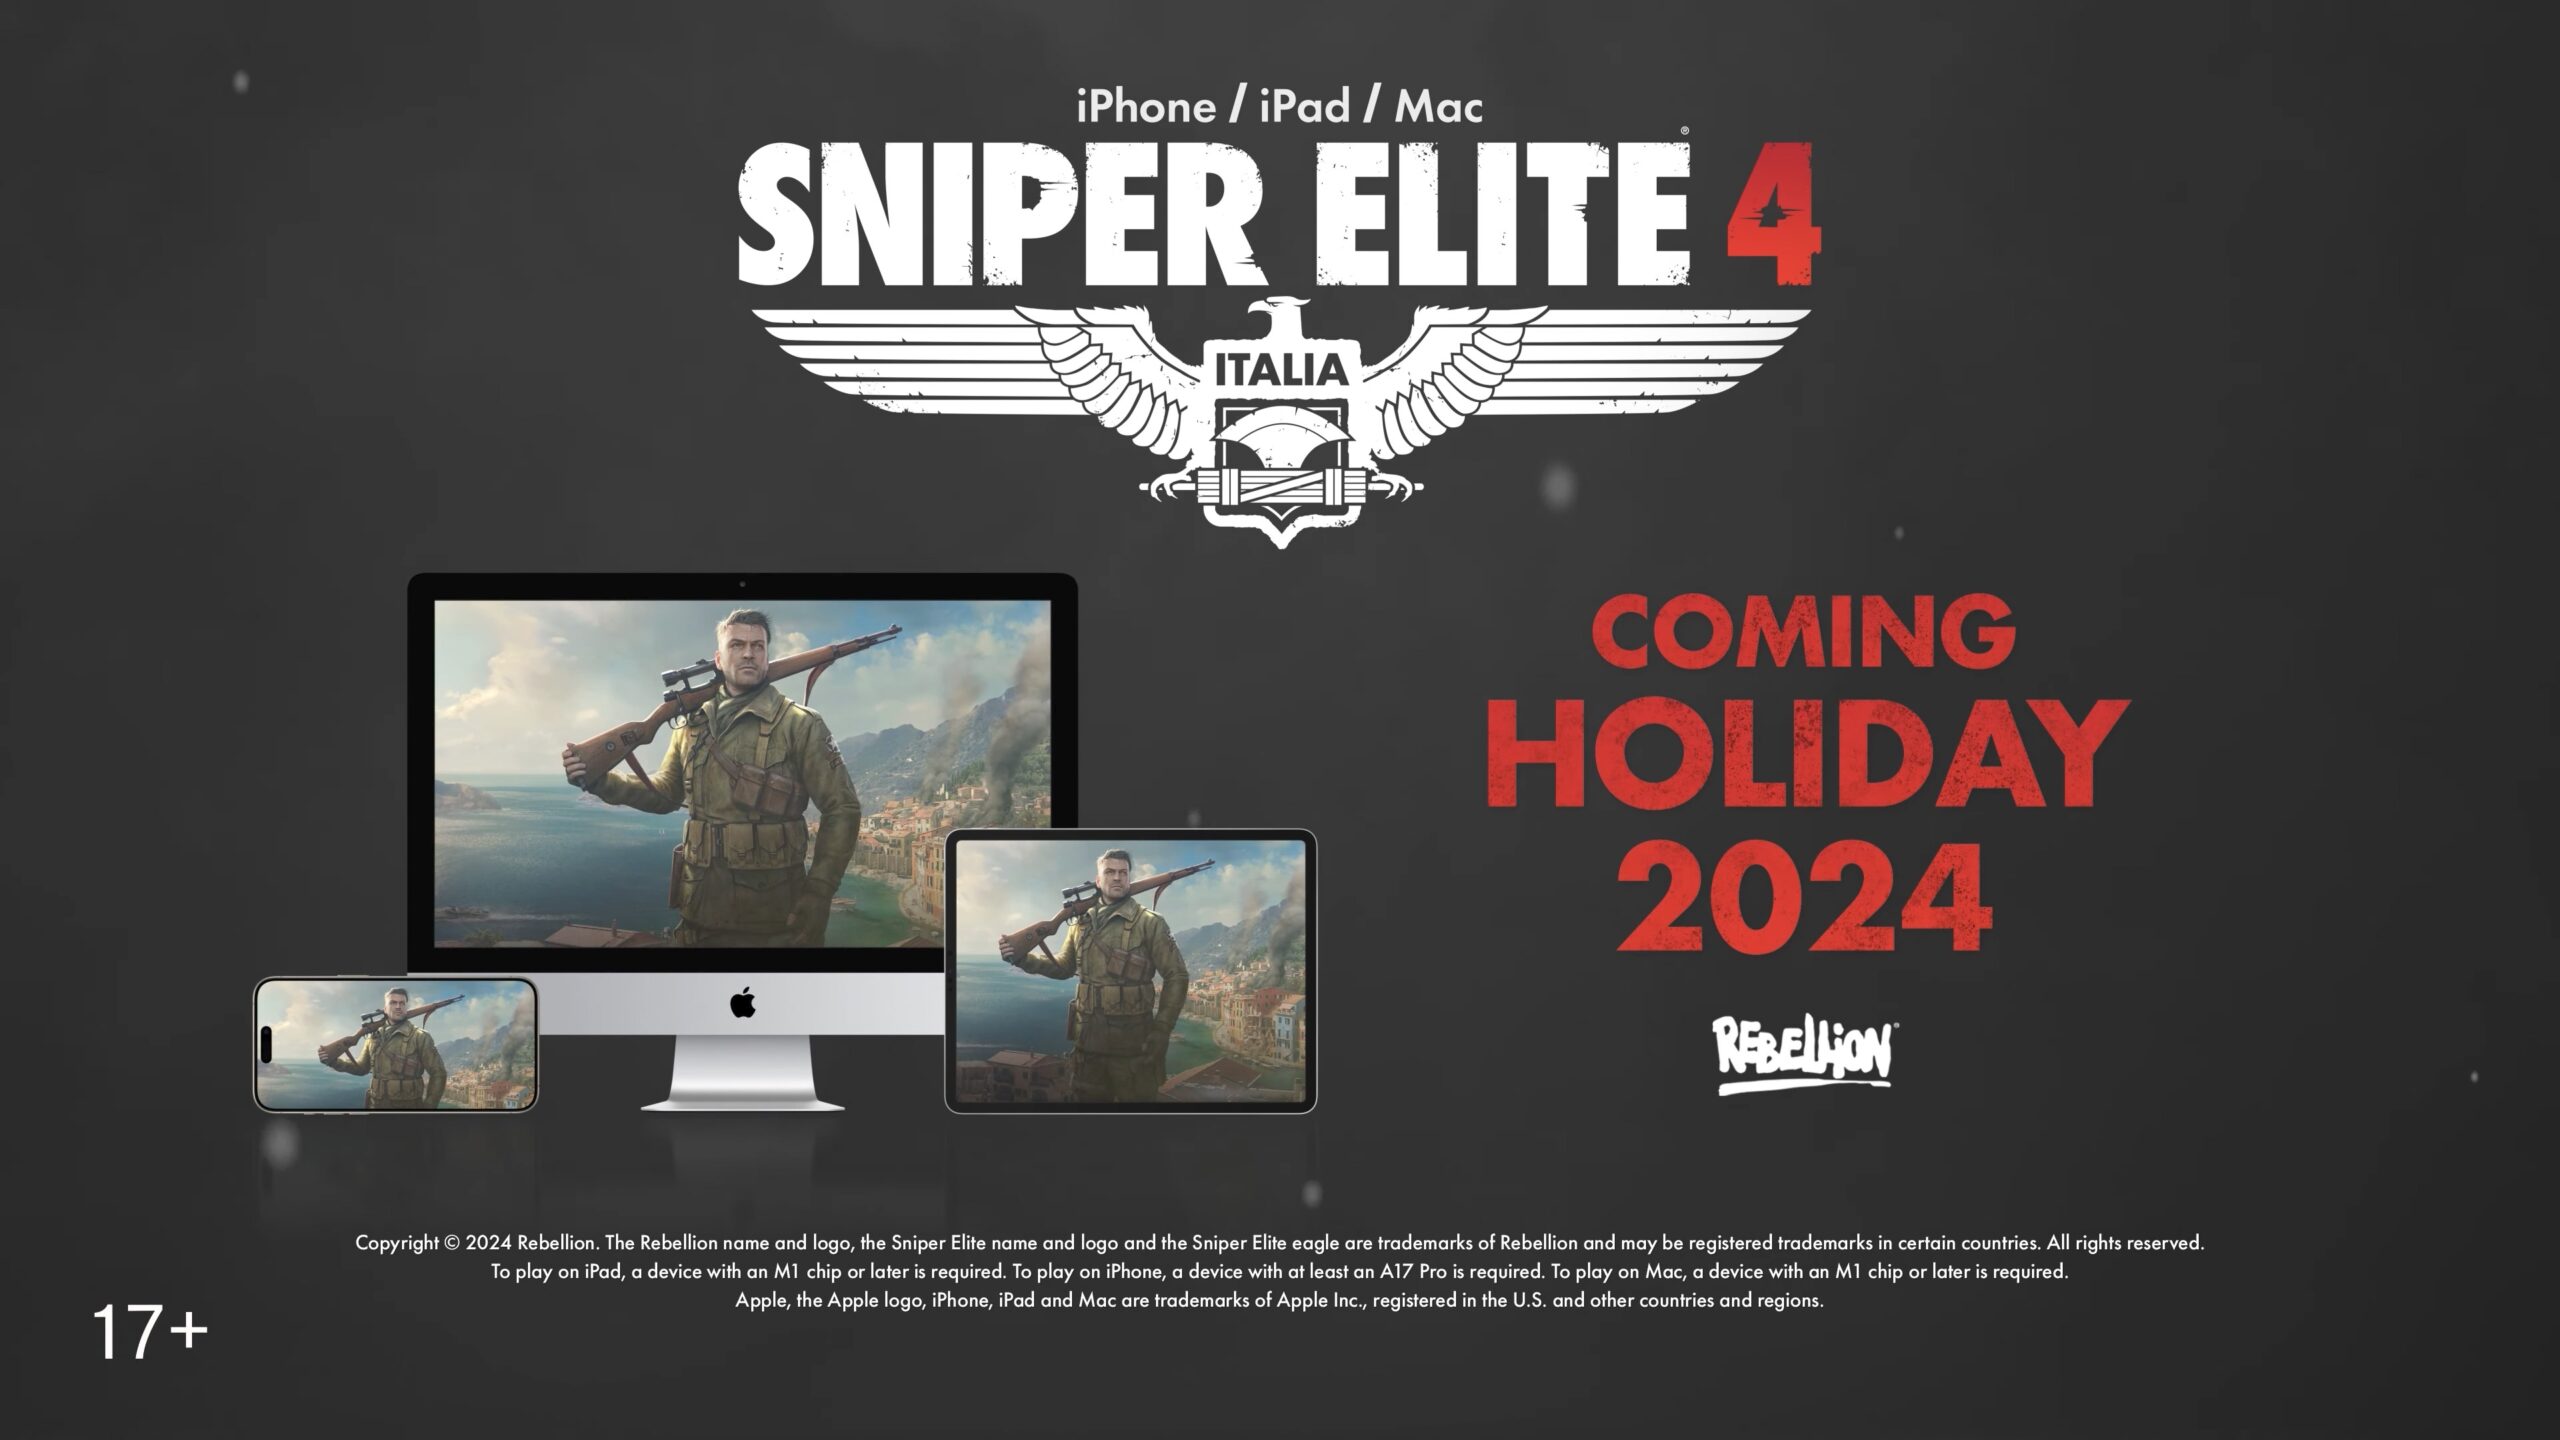 Sniper Elite 4 for iPhone iPad and Mac coming holiday 2024